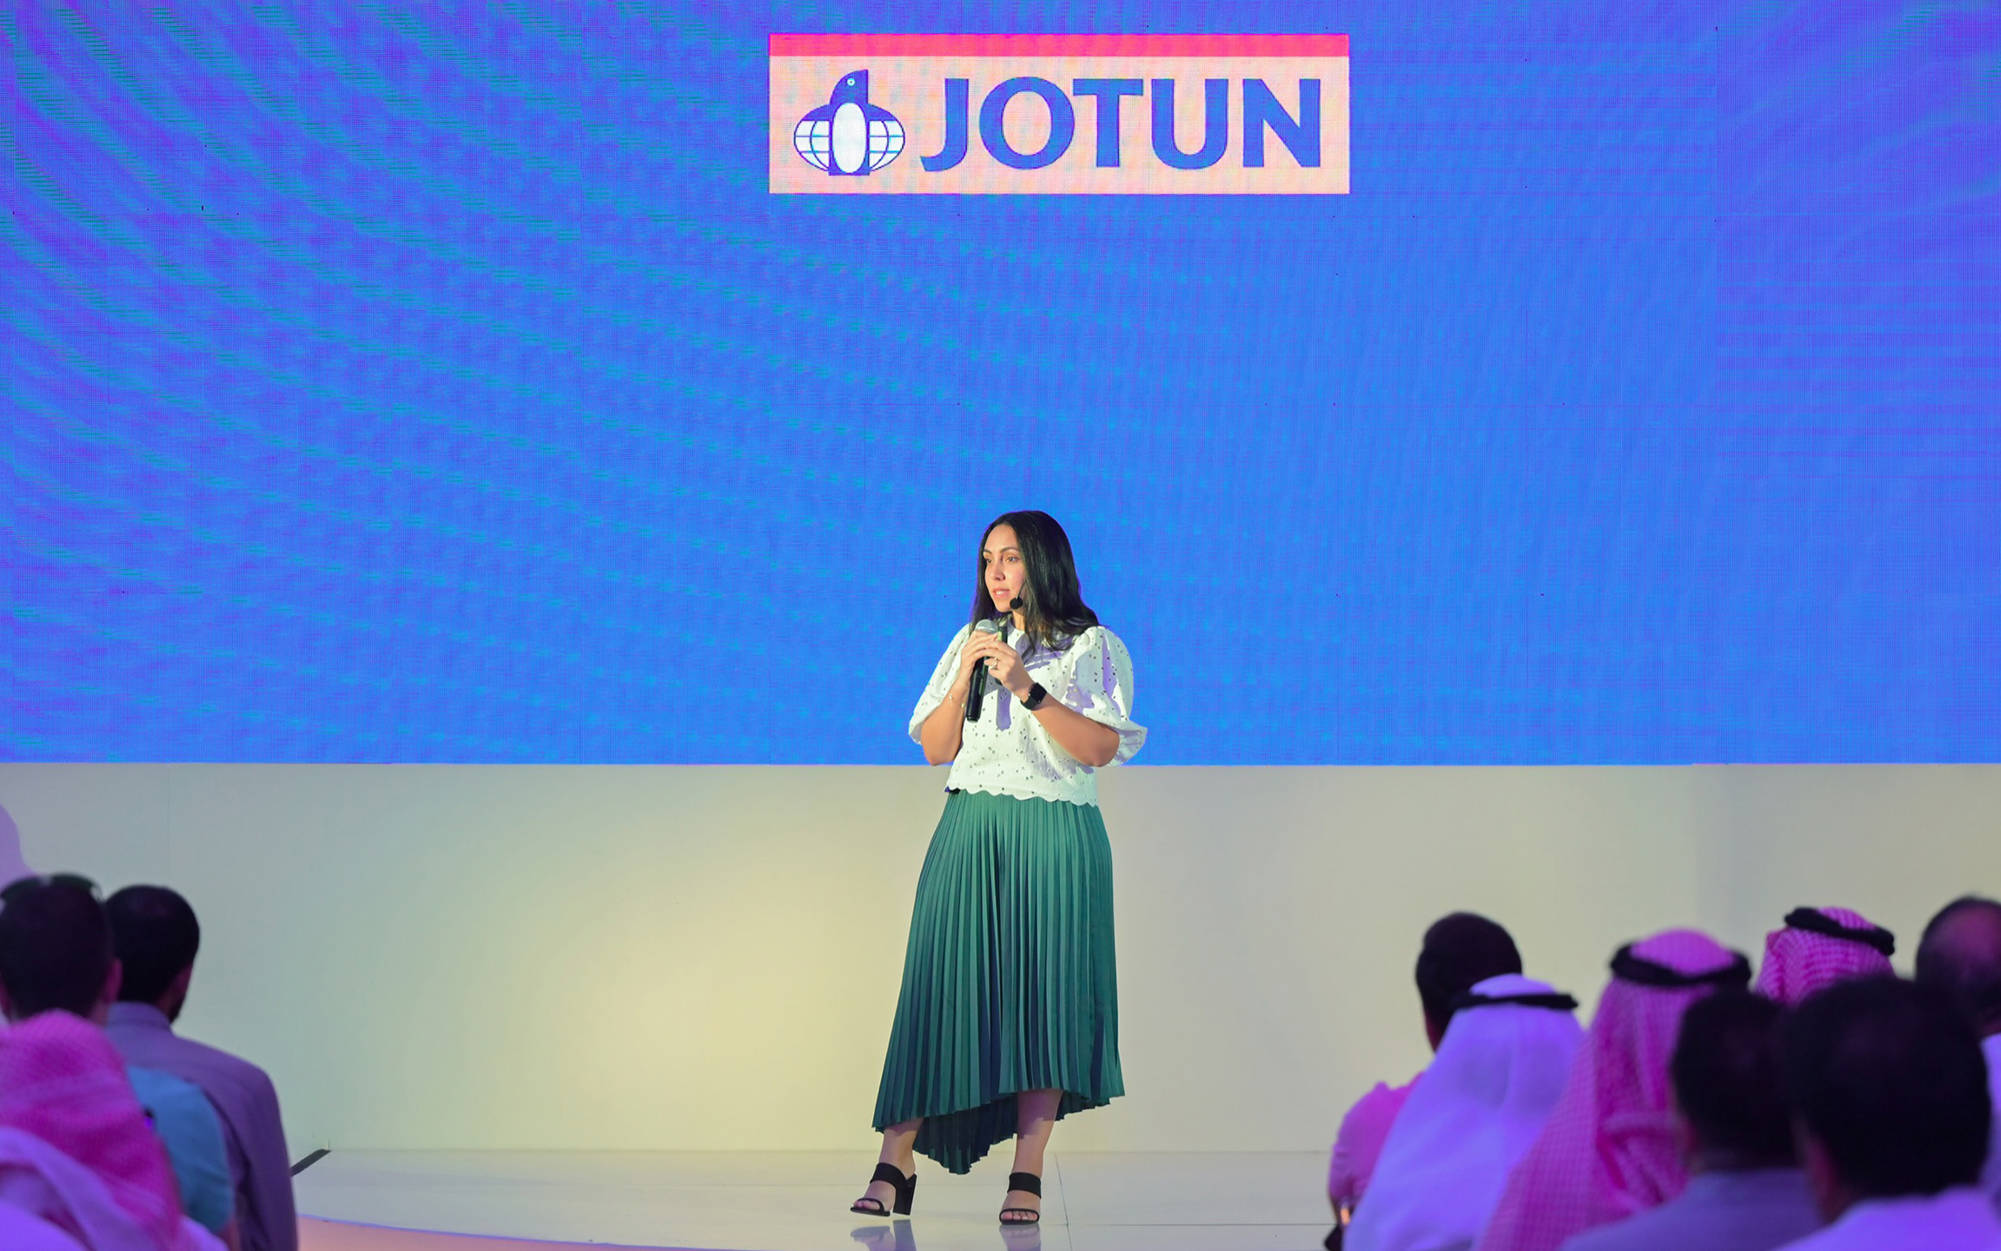 Yasmine Eladly on stage with a microphone